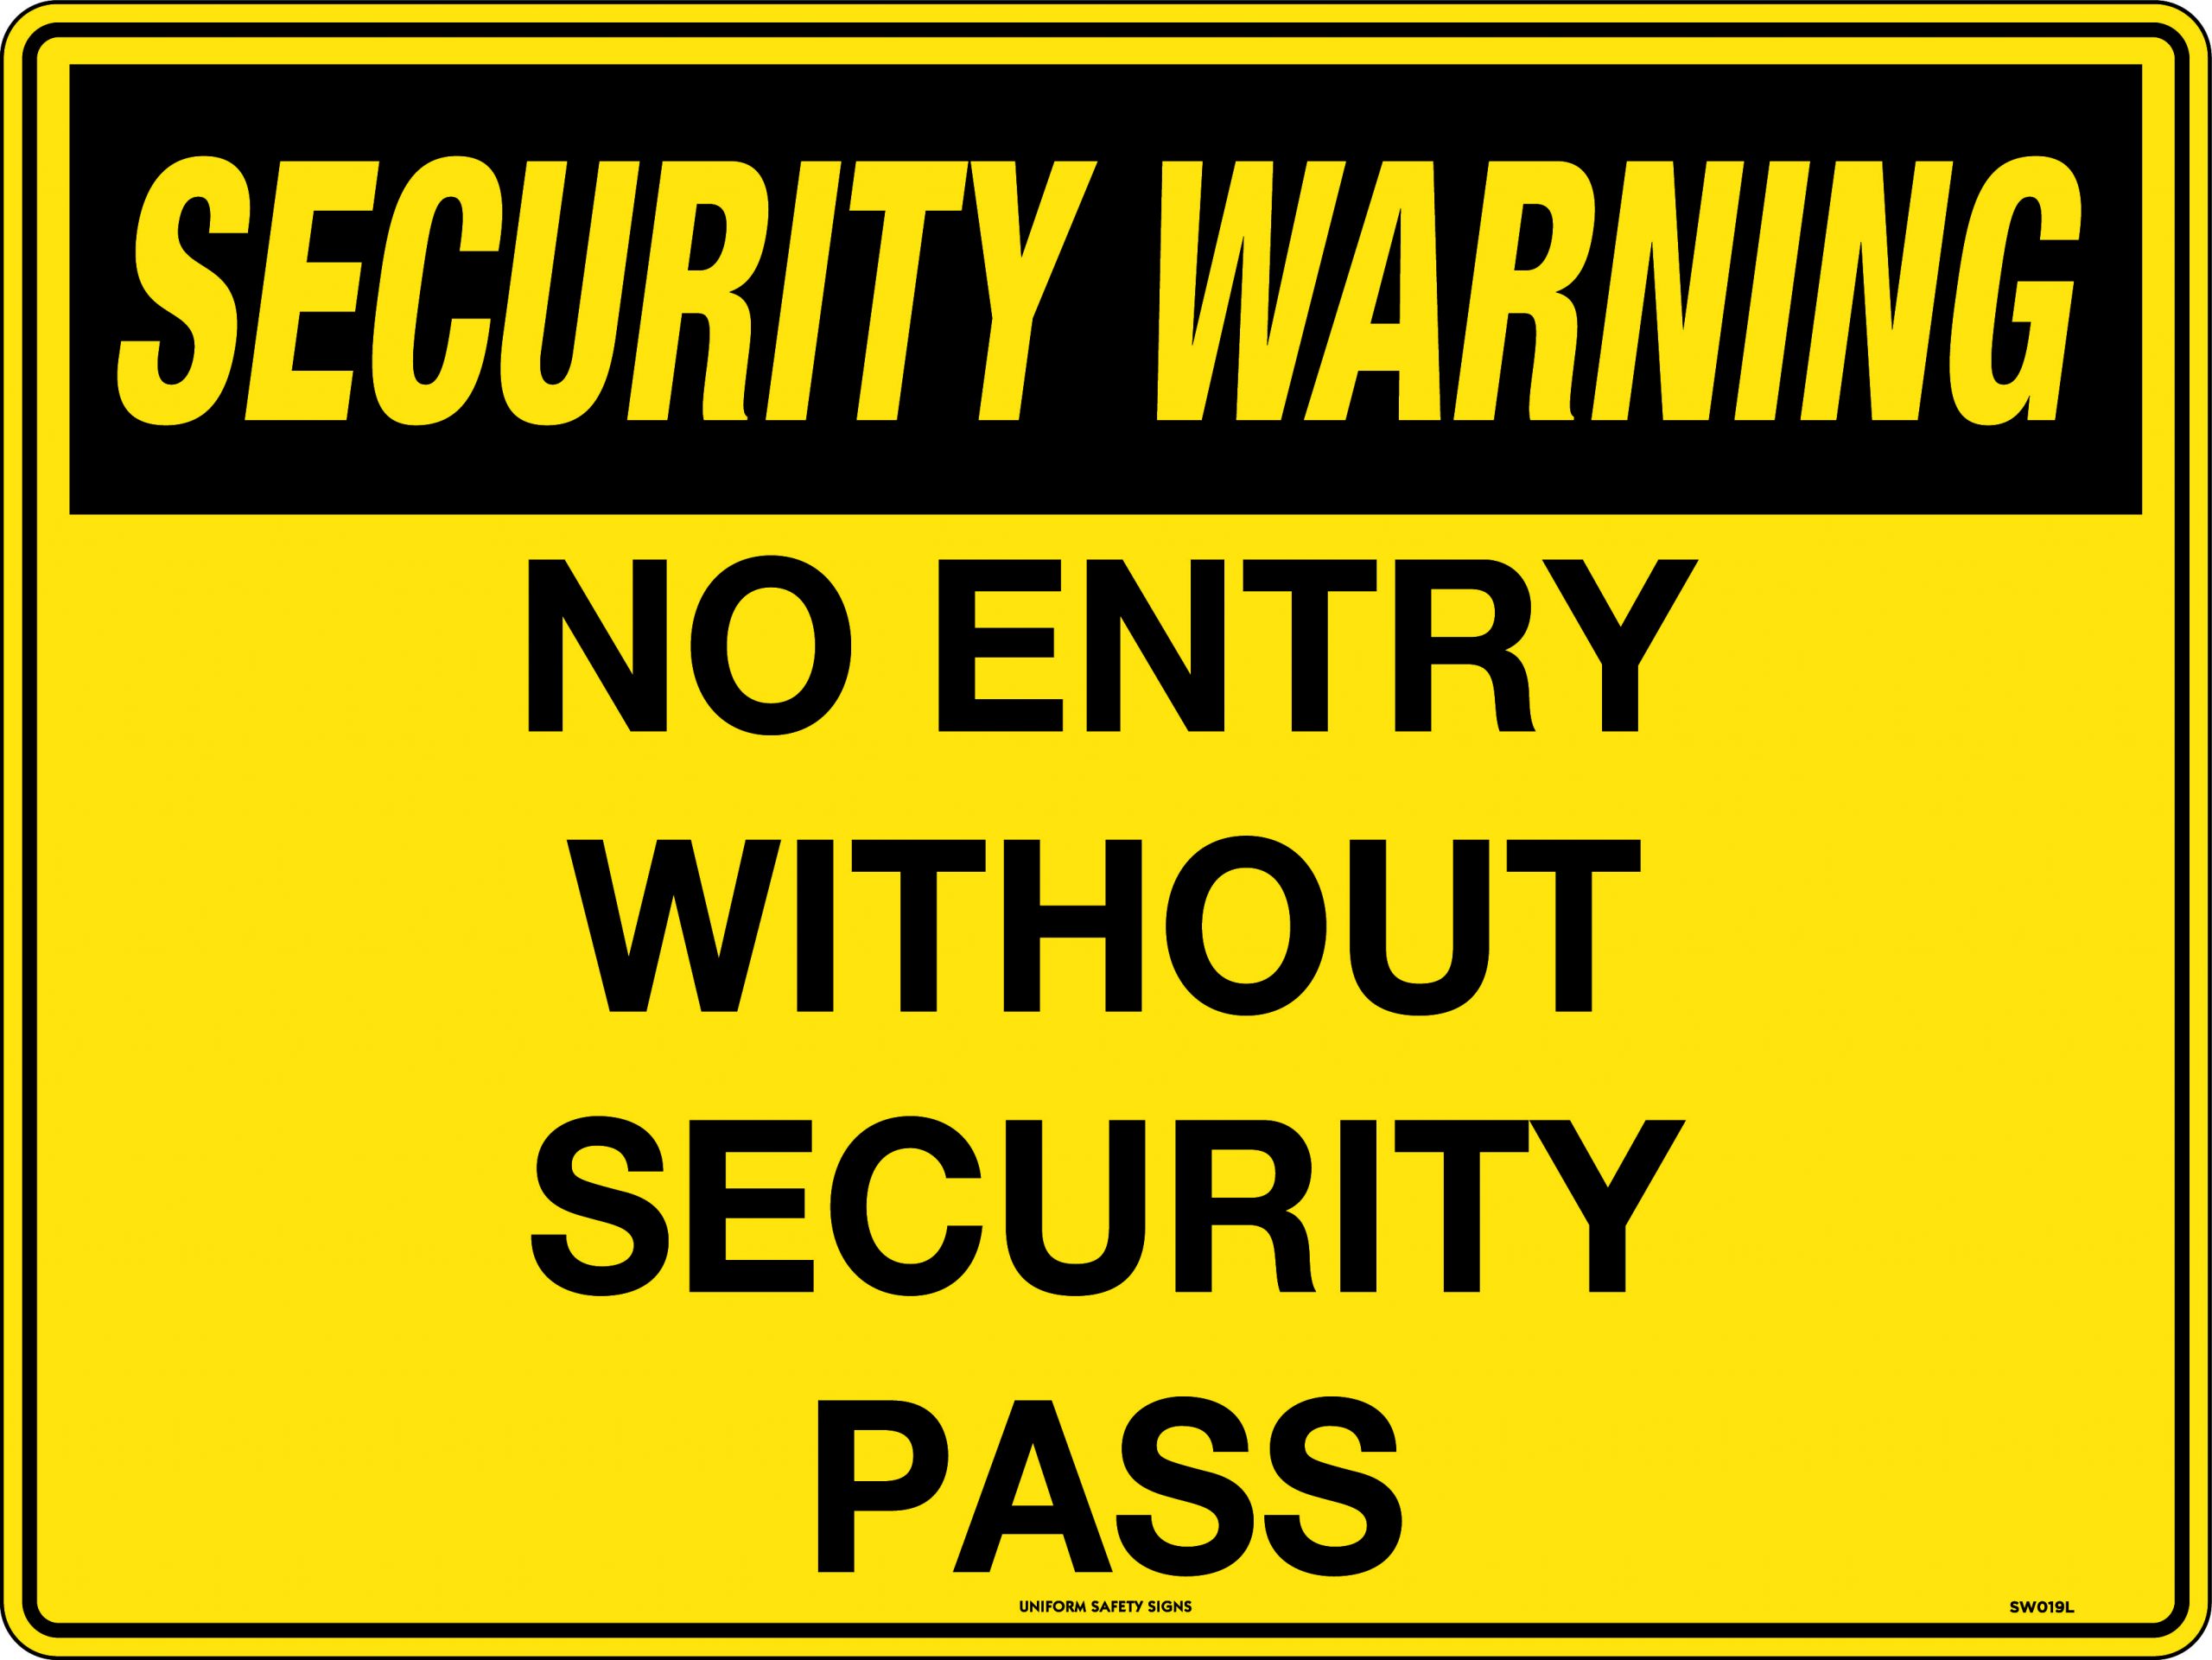 UNIFORM SAFETY 450X300MM POLY SEC WARNING NO ENTRY WITHOUT SEC PASS